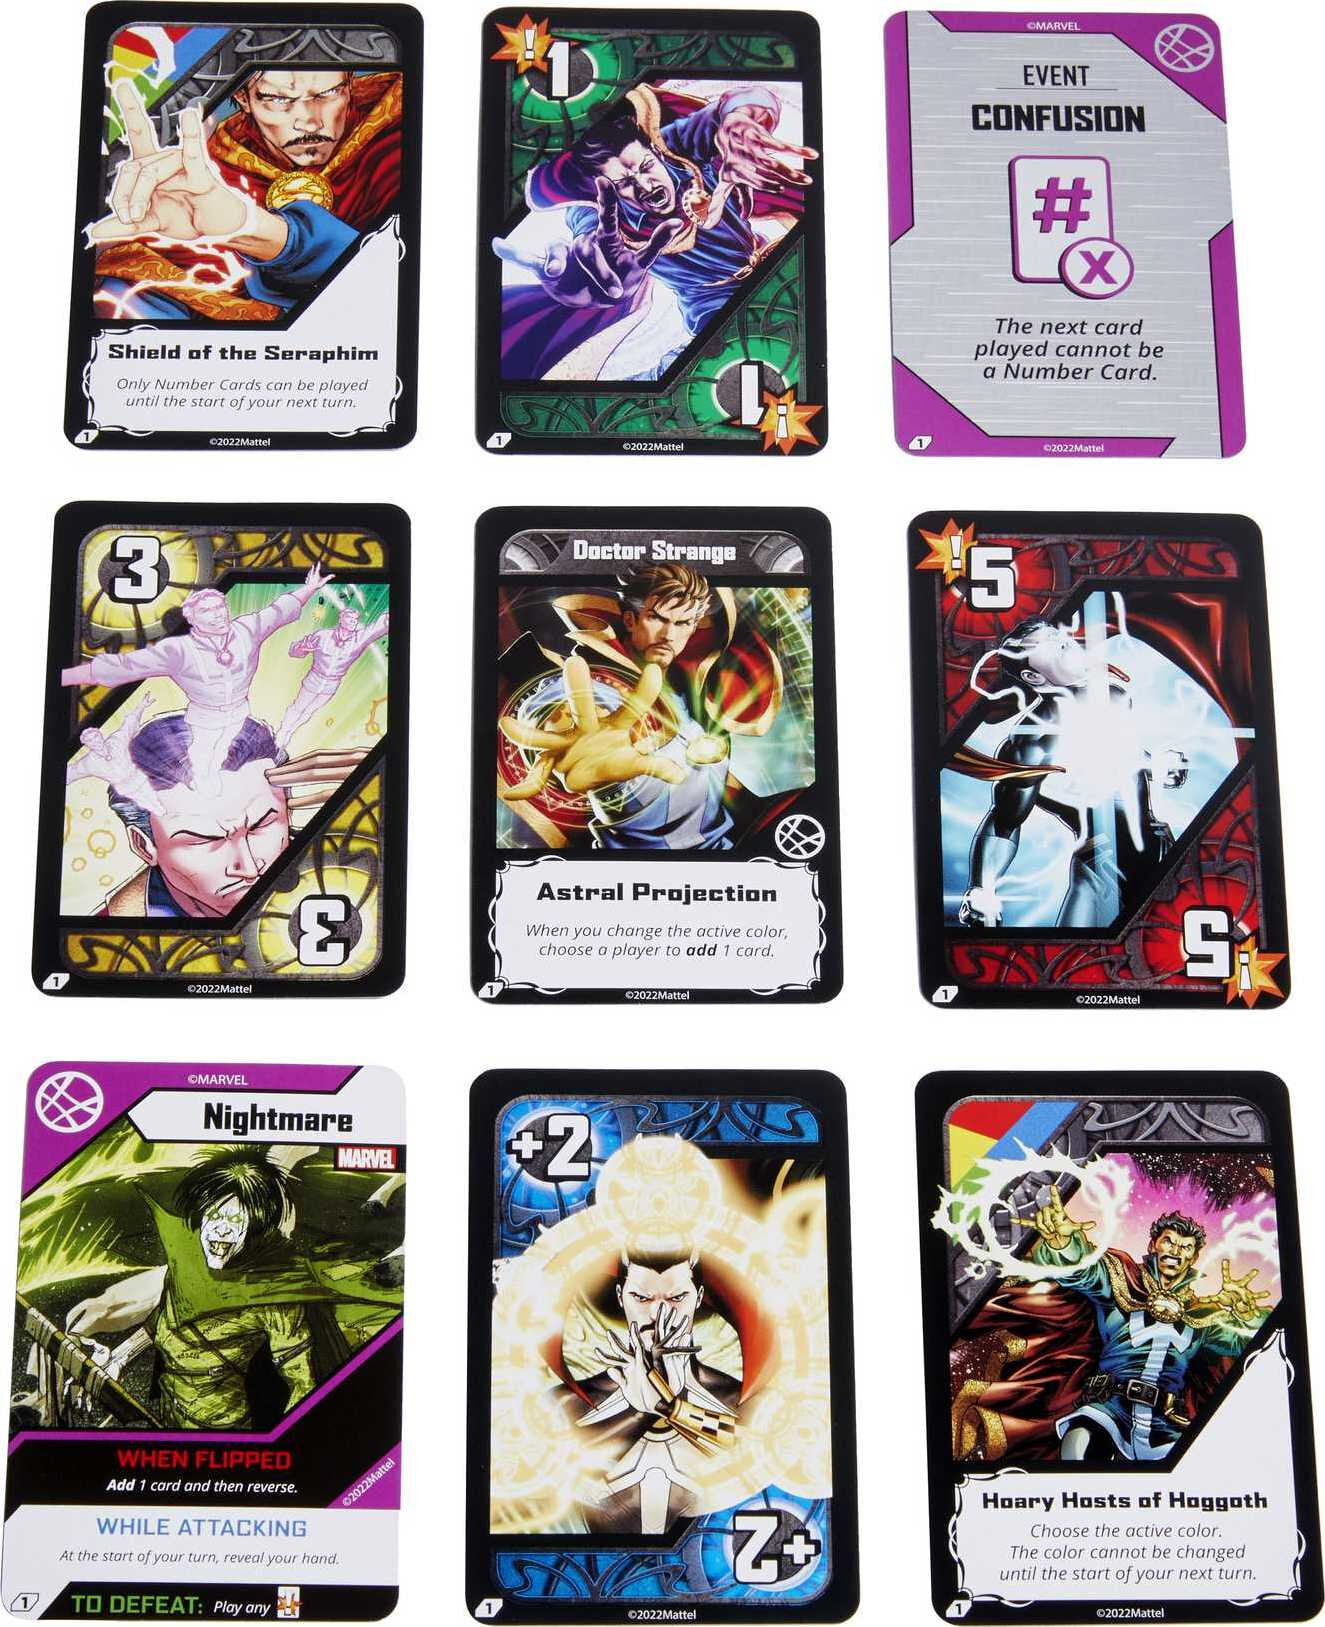 UNO Ultimate Marvel Add-On Pack with Collectible Ghost-Spider Deck